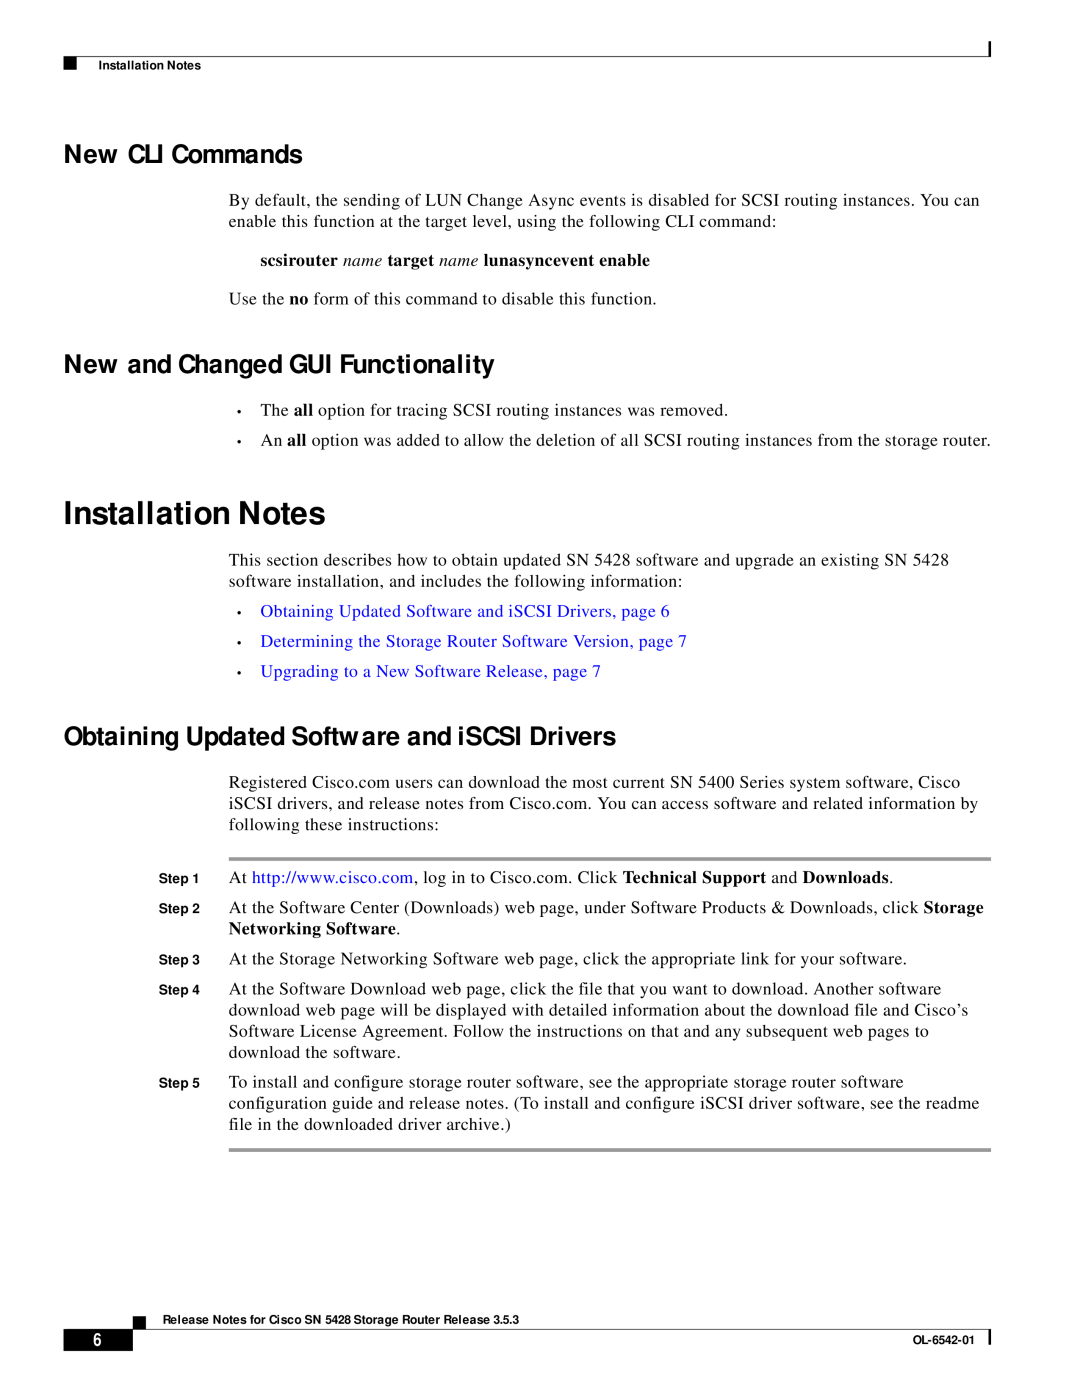 Cisco Systems SN 5428 manual Installation Notes, New CLI Commands, New and Changed GUI Functionality 